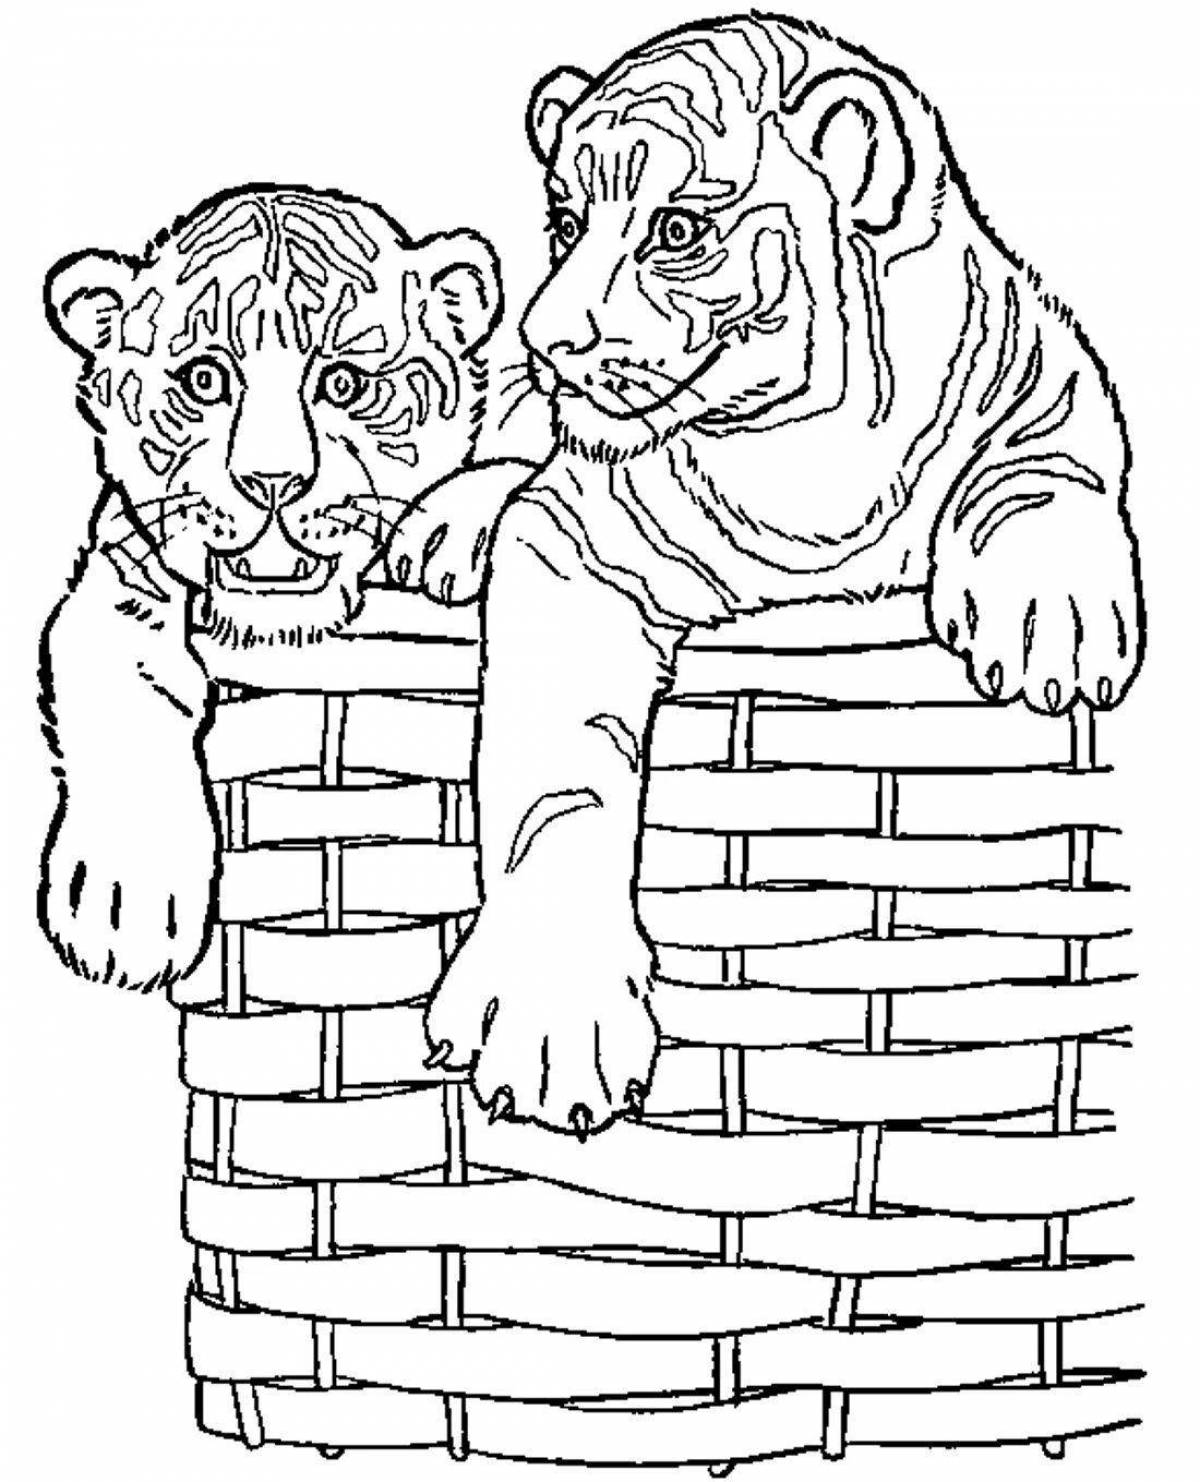 Animated tiger coloring page for kids